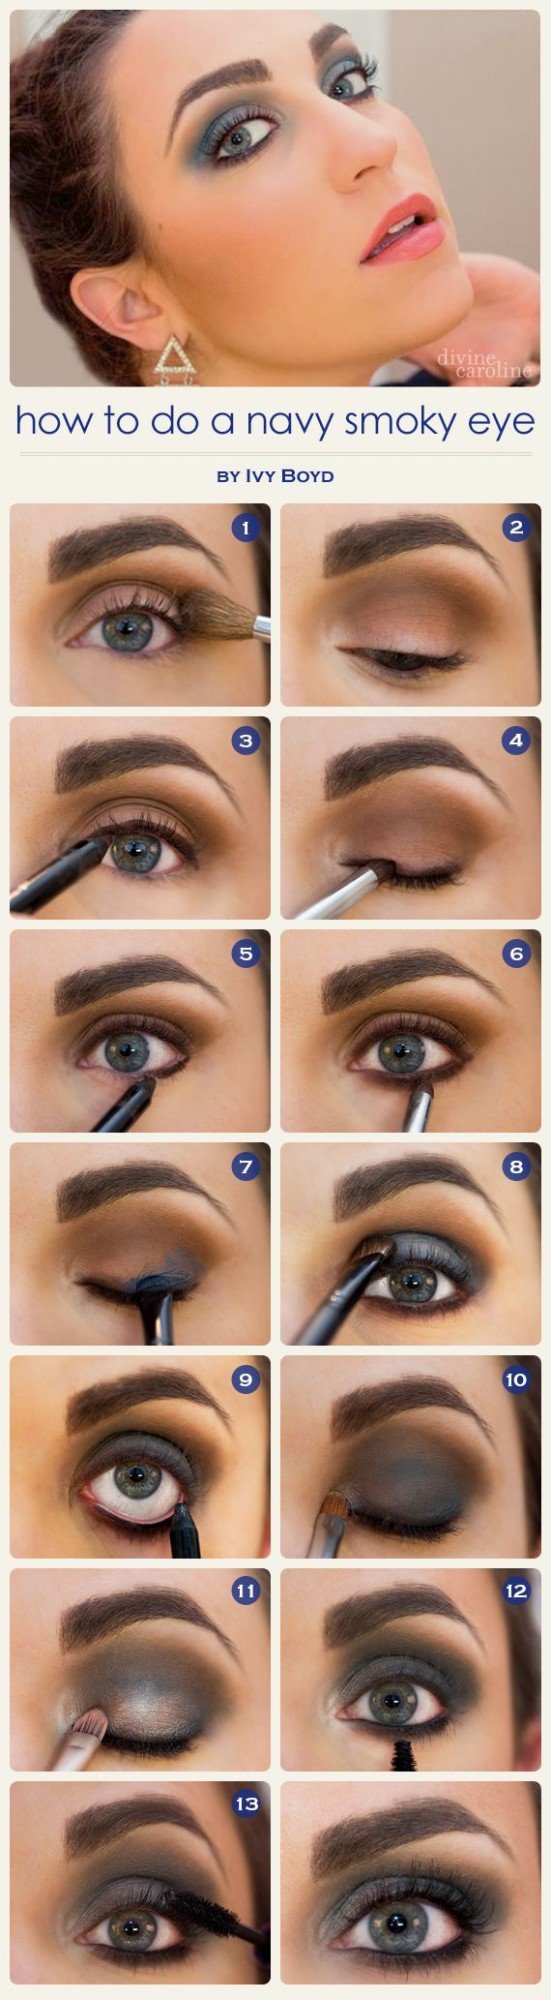 30 Photos of The Best Fall Makeup Trends, Ideas and Tutorials (7)